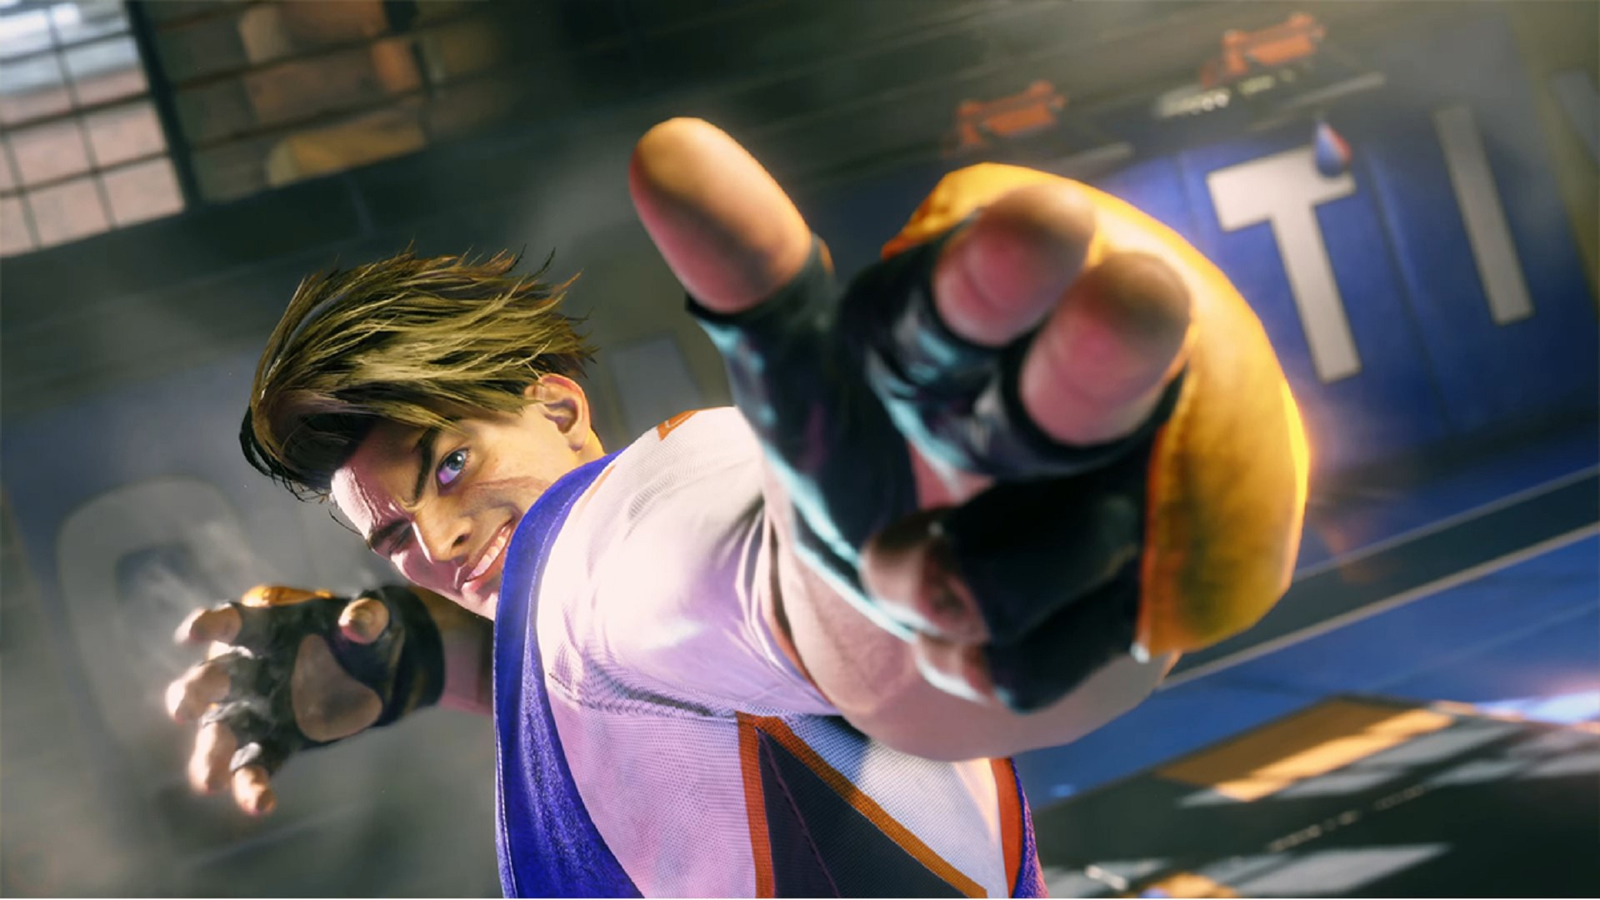 Street Fighter 6 Might Not Launch Before April 2023 According to